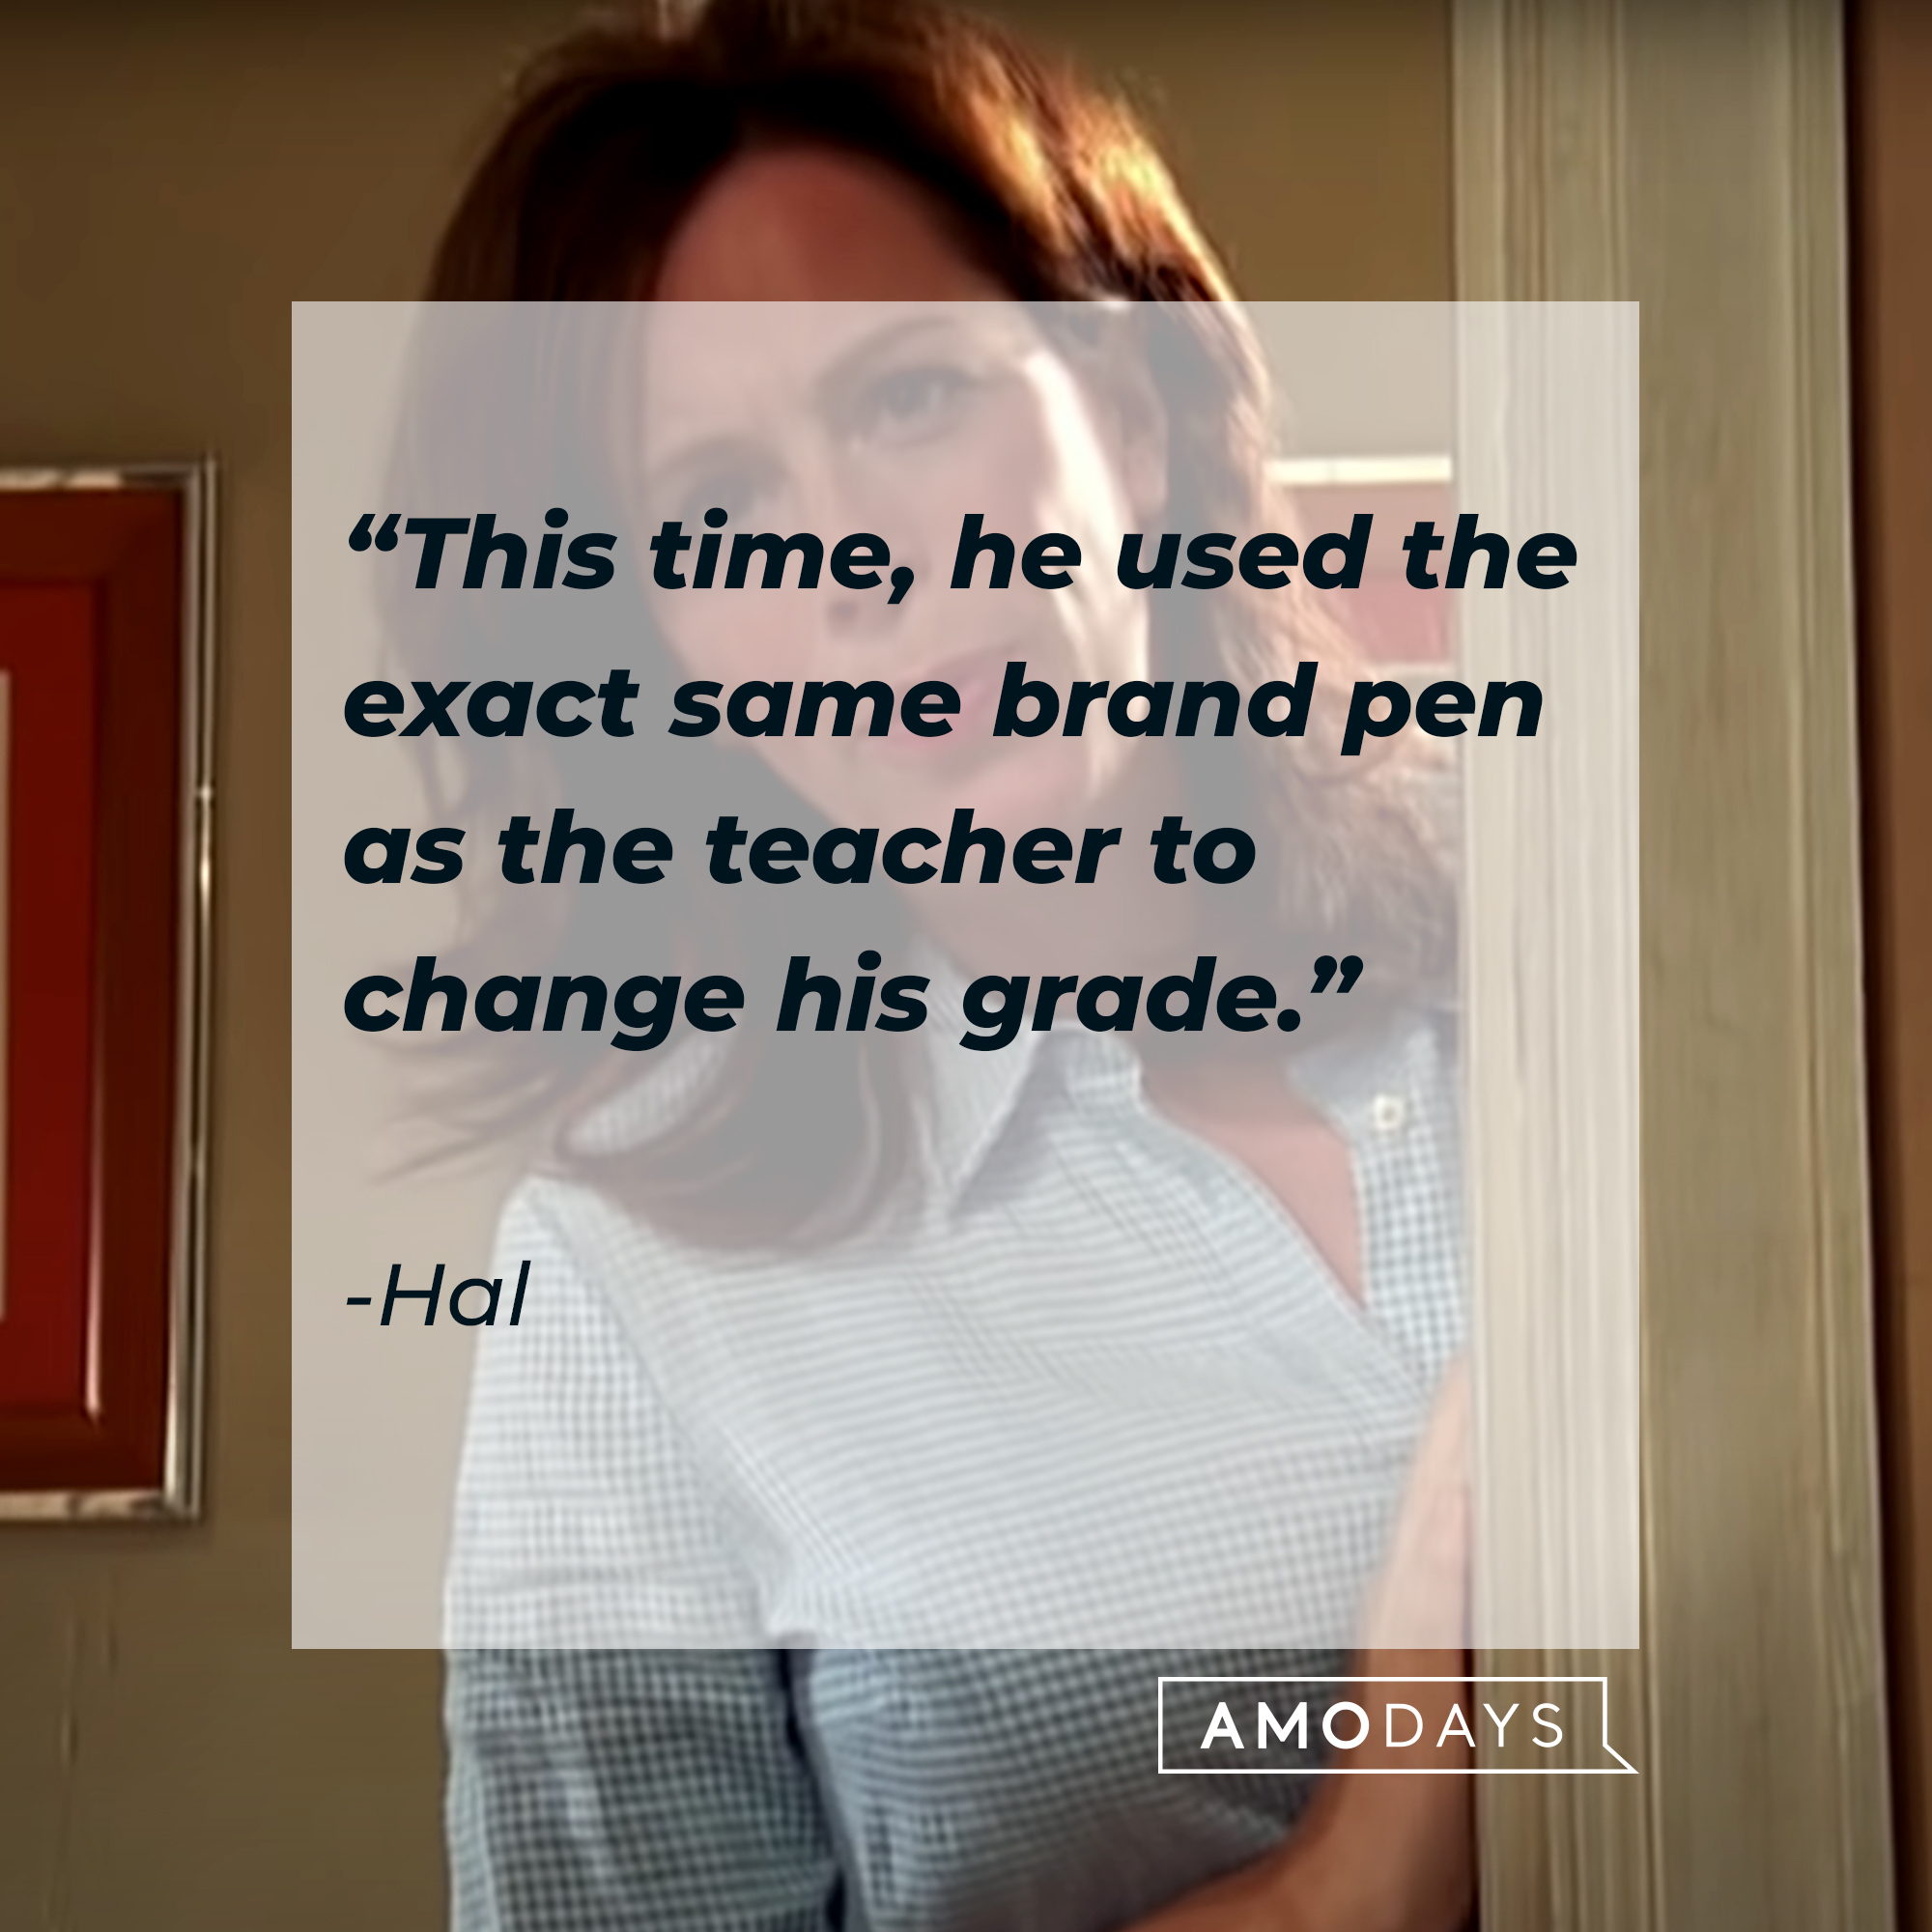 A "Malcolm in the Middle" character with Hal's quote: “This time, he used the exact same brand pen as the teacher to change his grade.” | Source: YouTube.com/Channel4